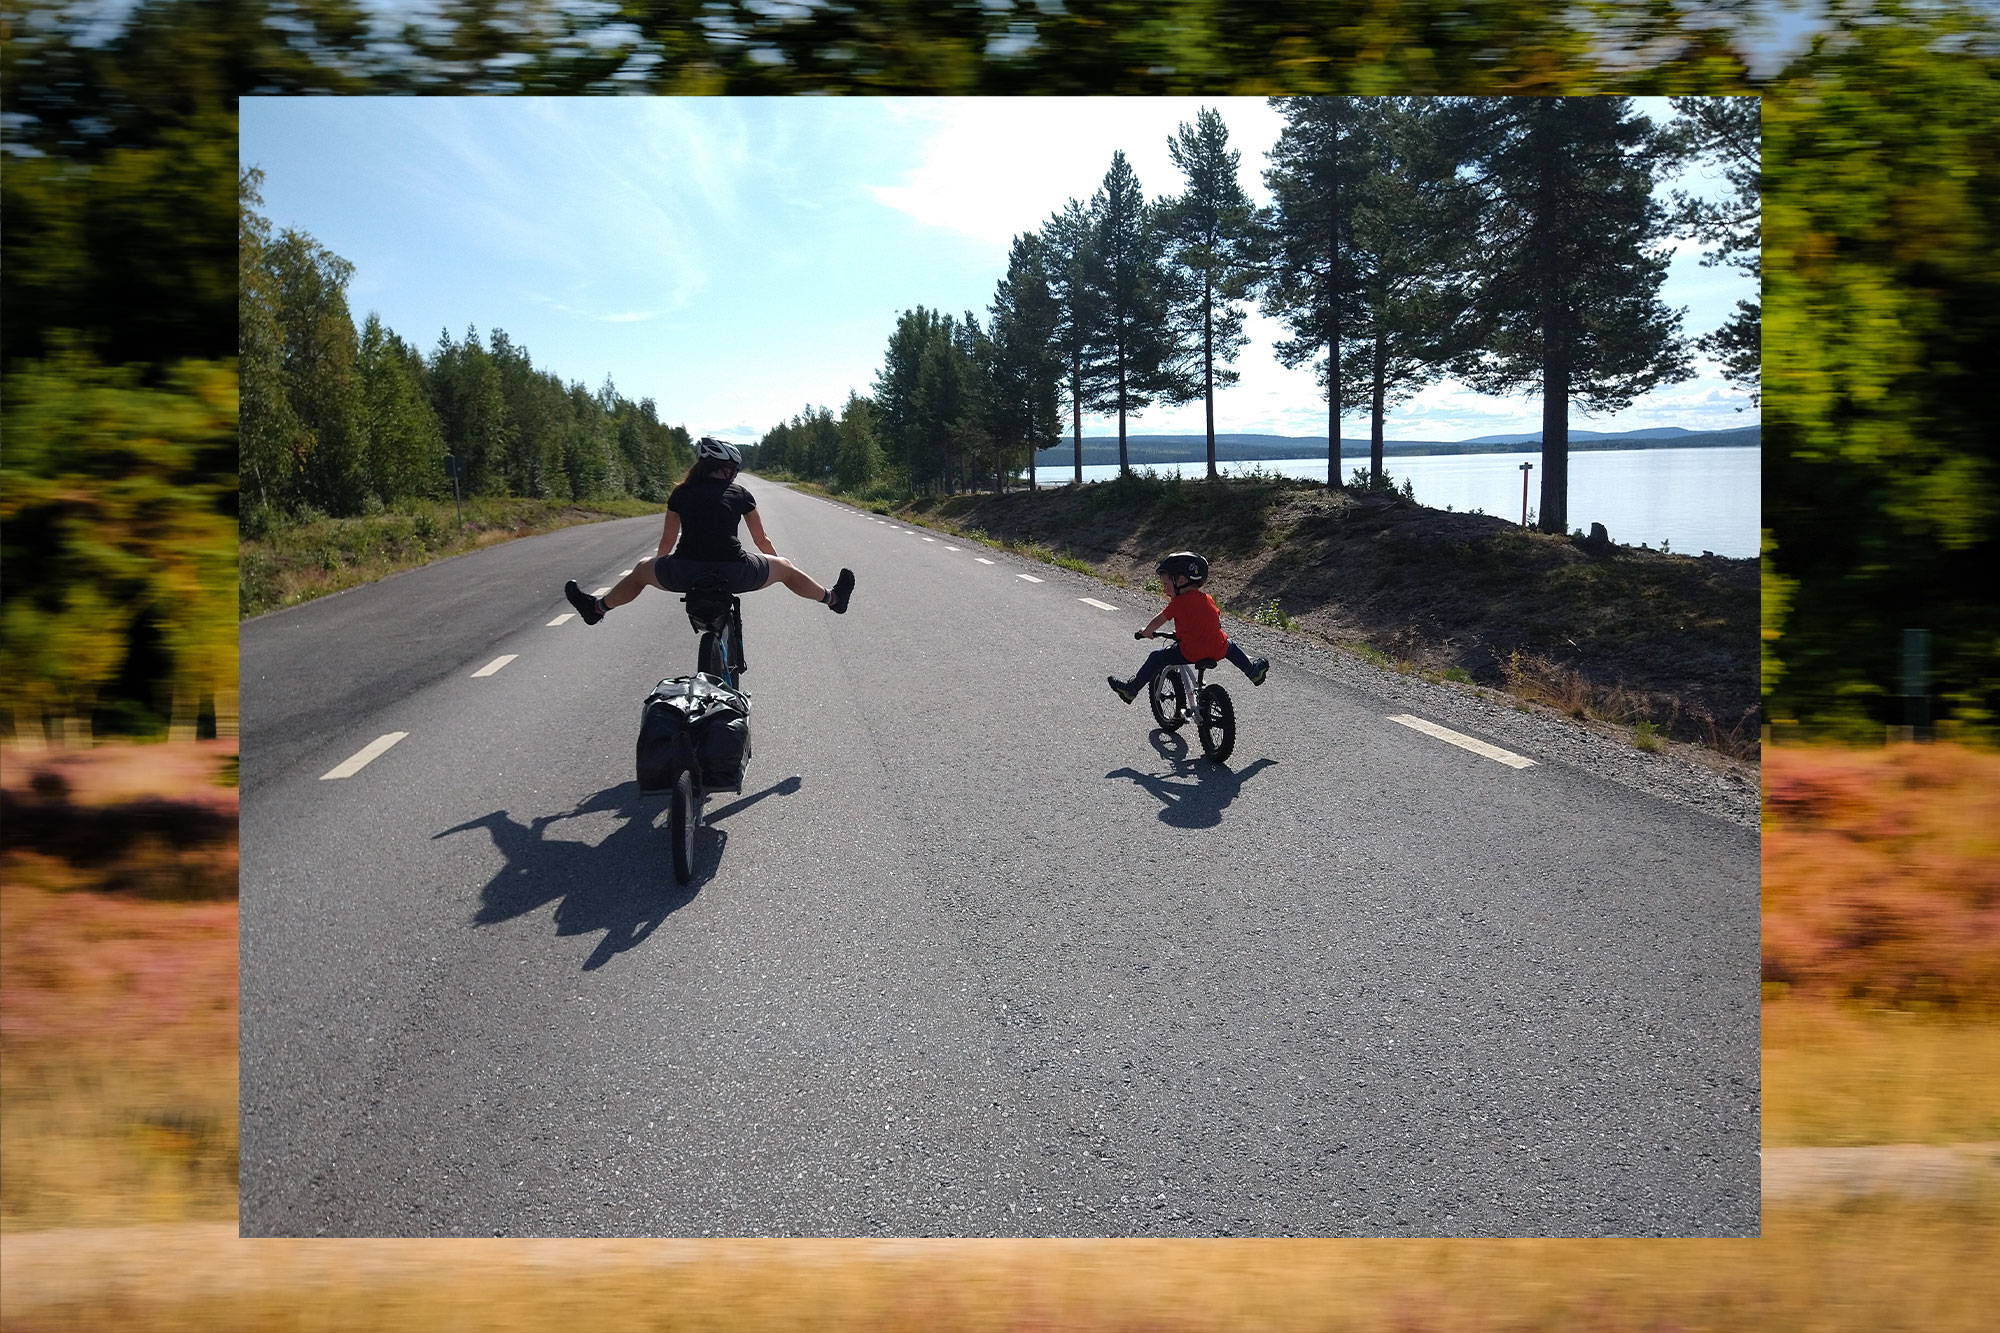 Katrien and son riding on the road